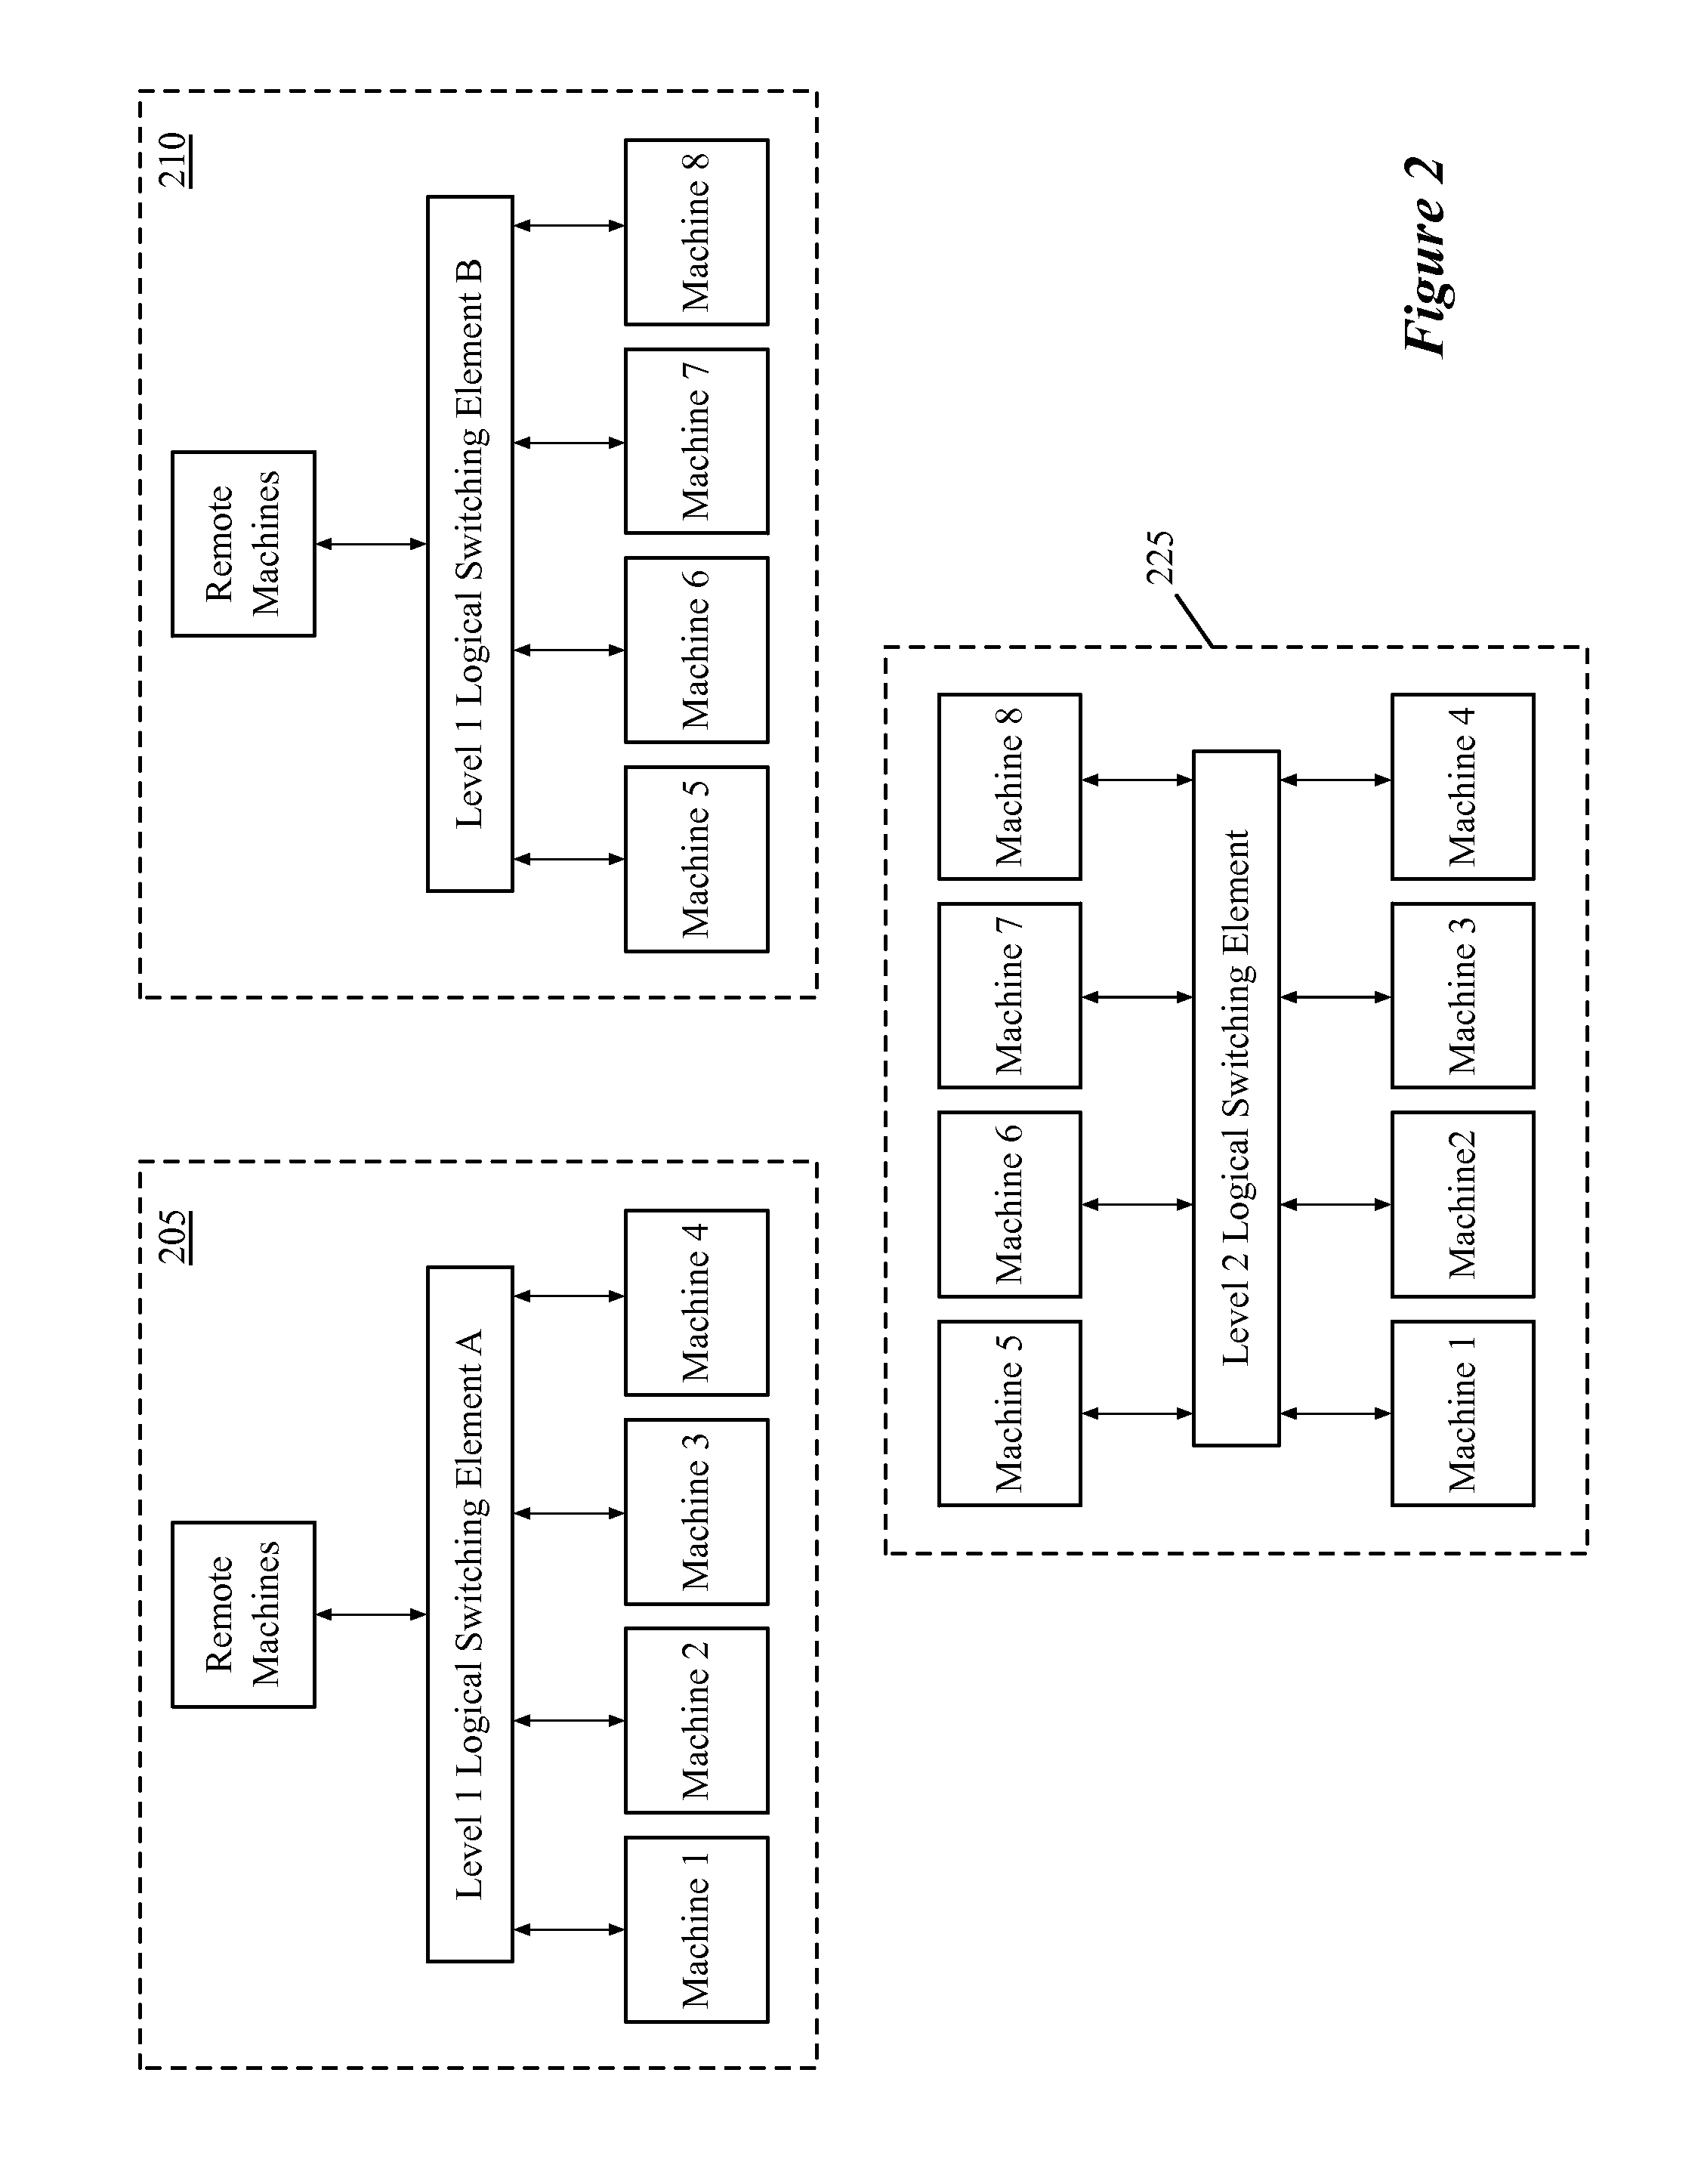 Flow generation from second level controller to first level controller to managed switching element